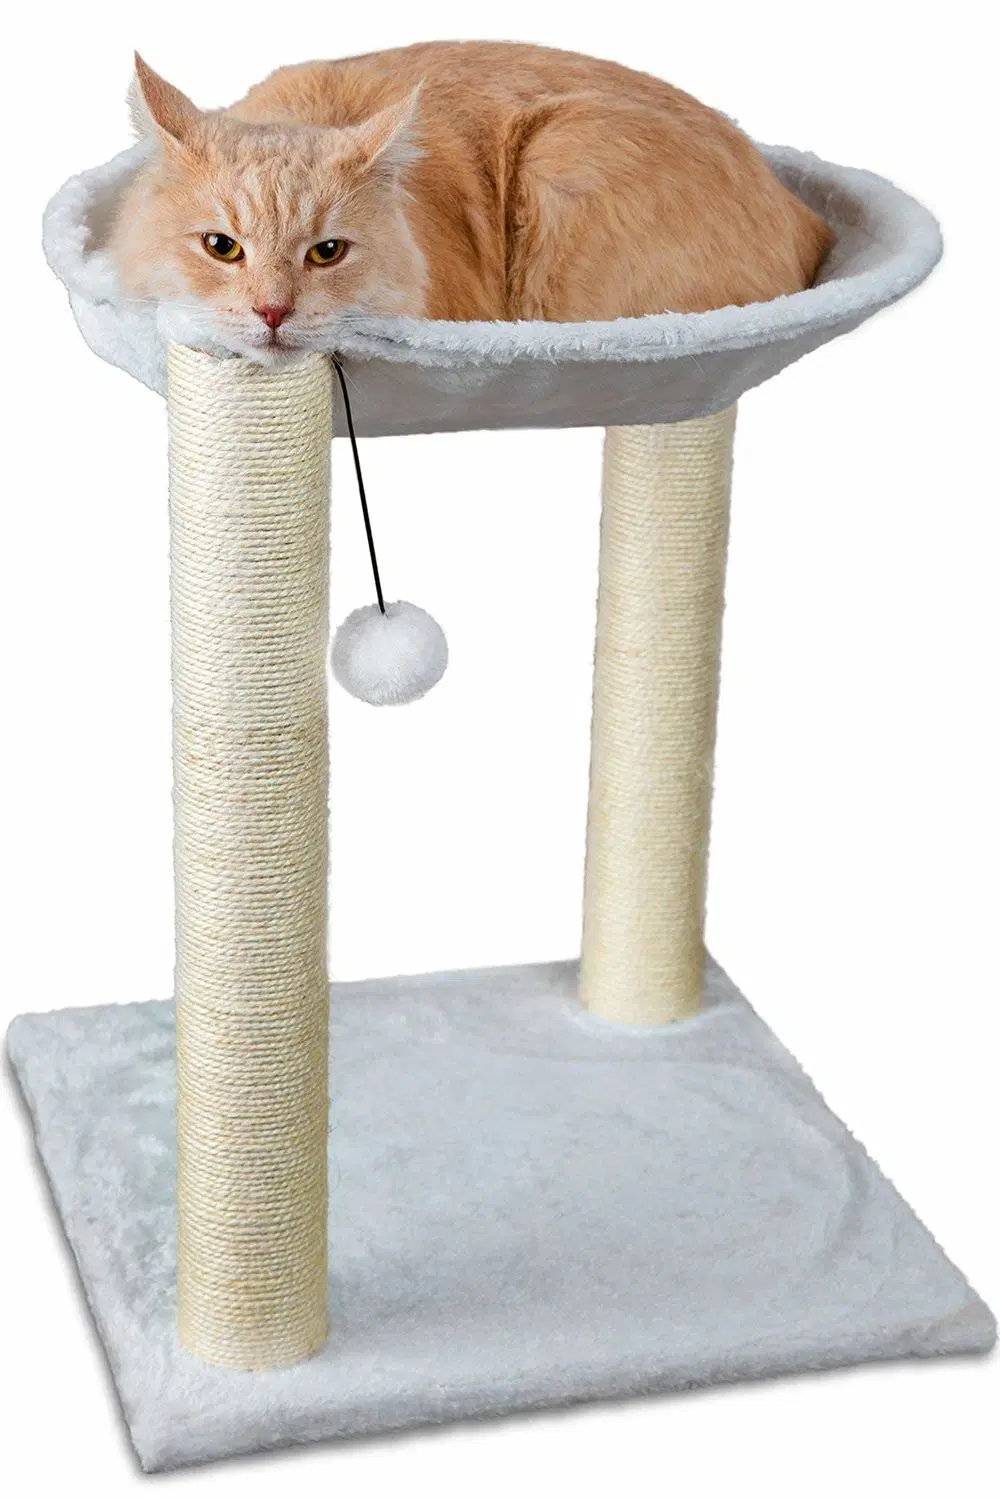 Cat Tree House, 16 X 16 X 20-Inches, Multi 2 Level, White with Scratching Post Tower, Hammock Bed and Pet Toy Ball